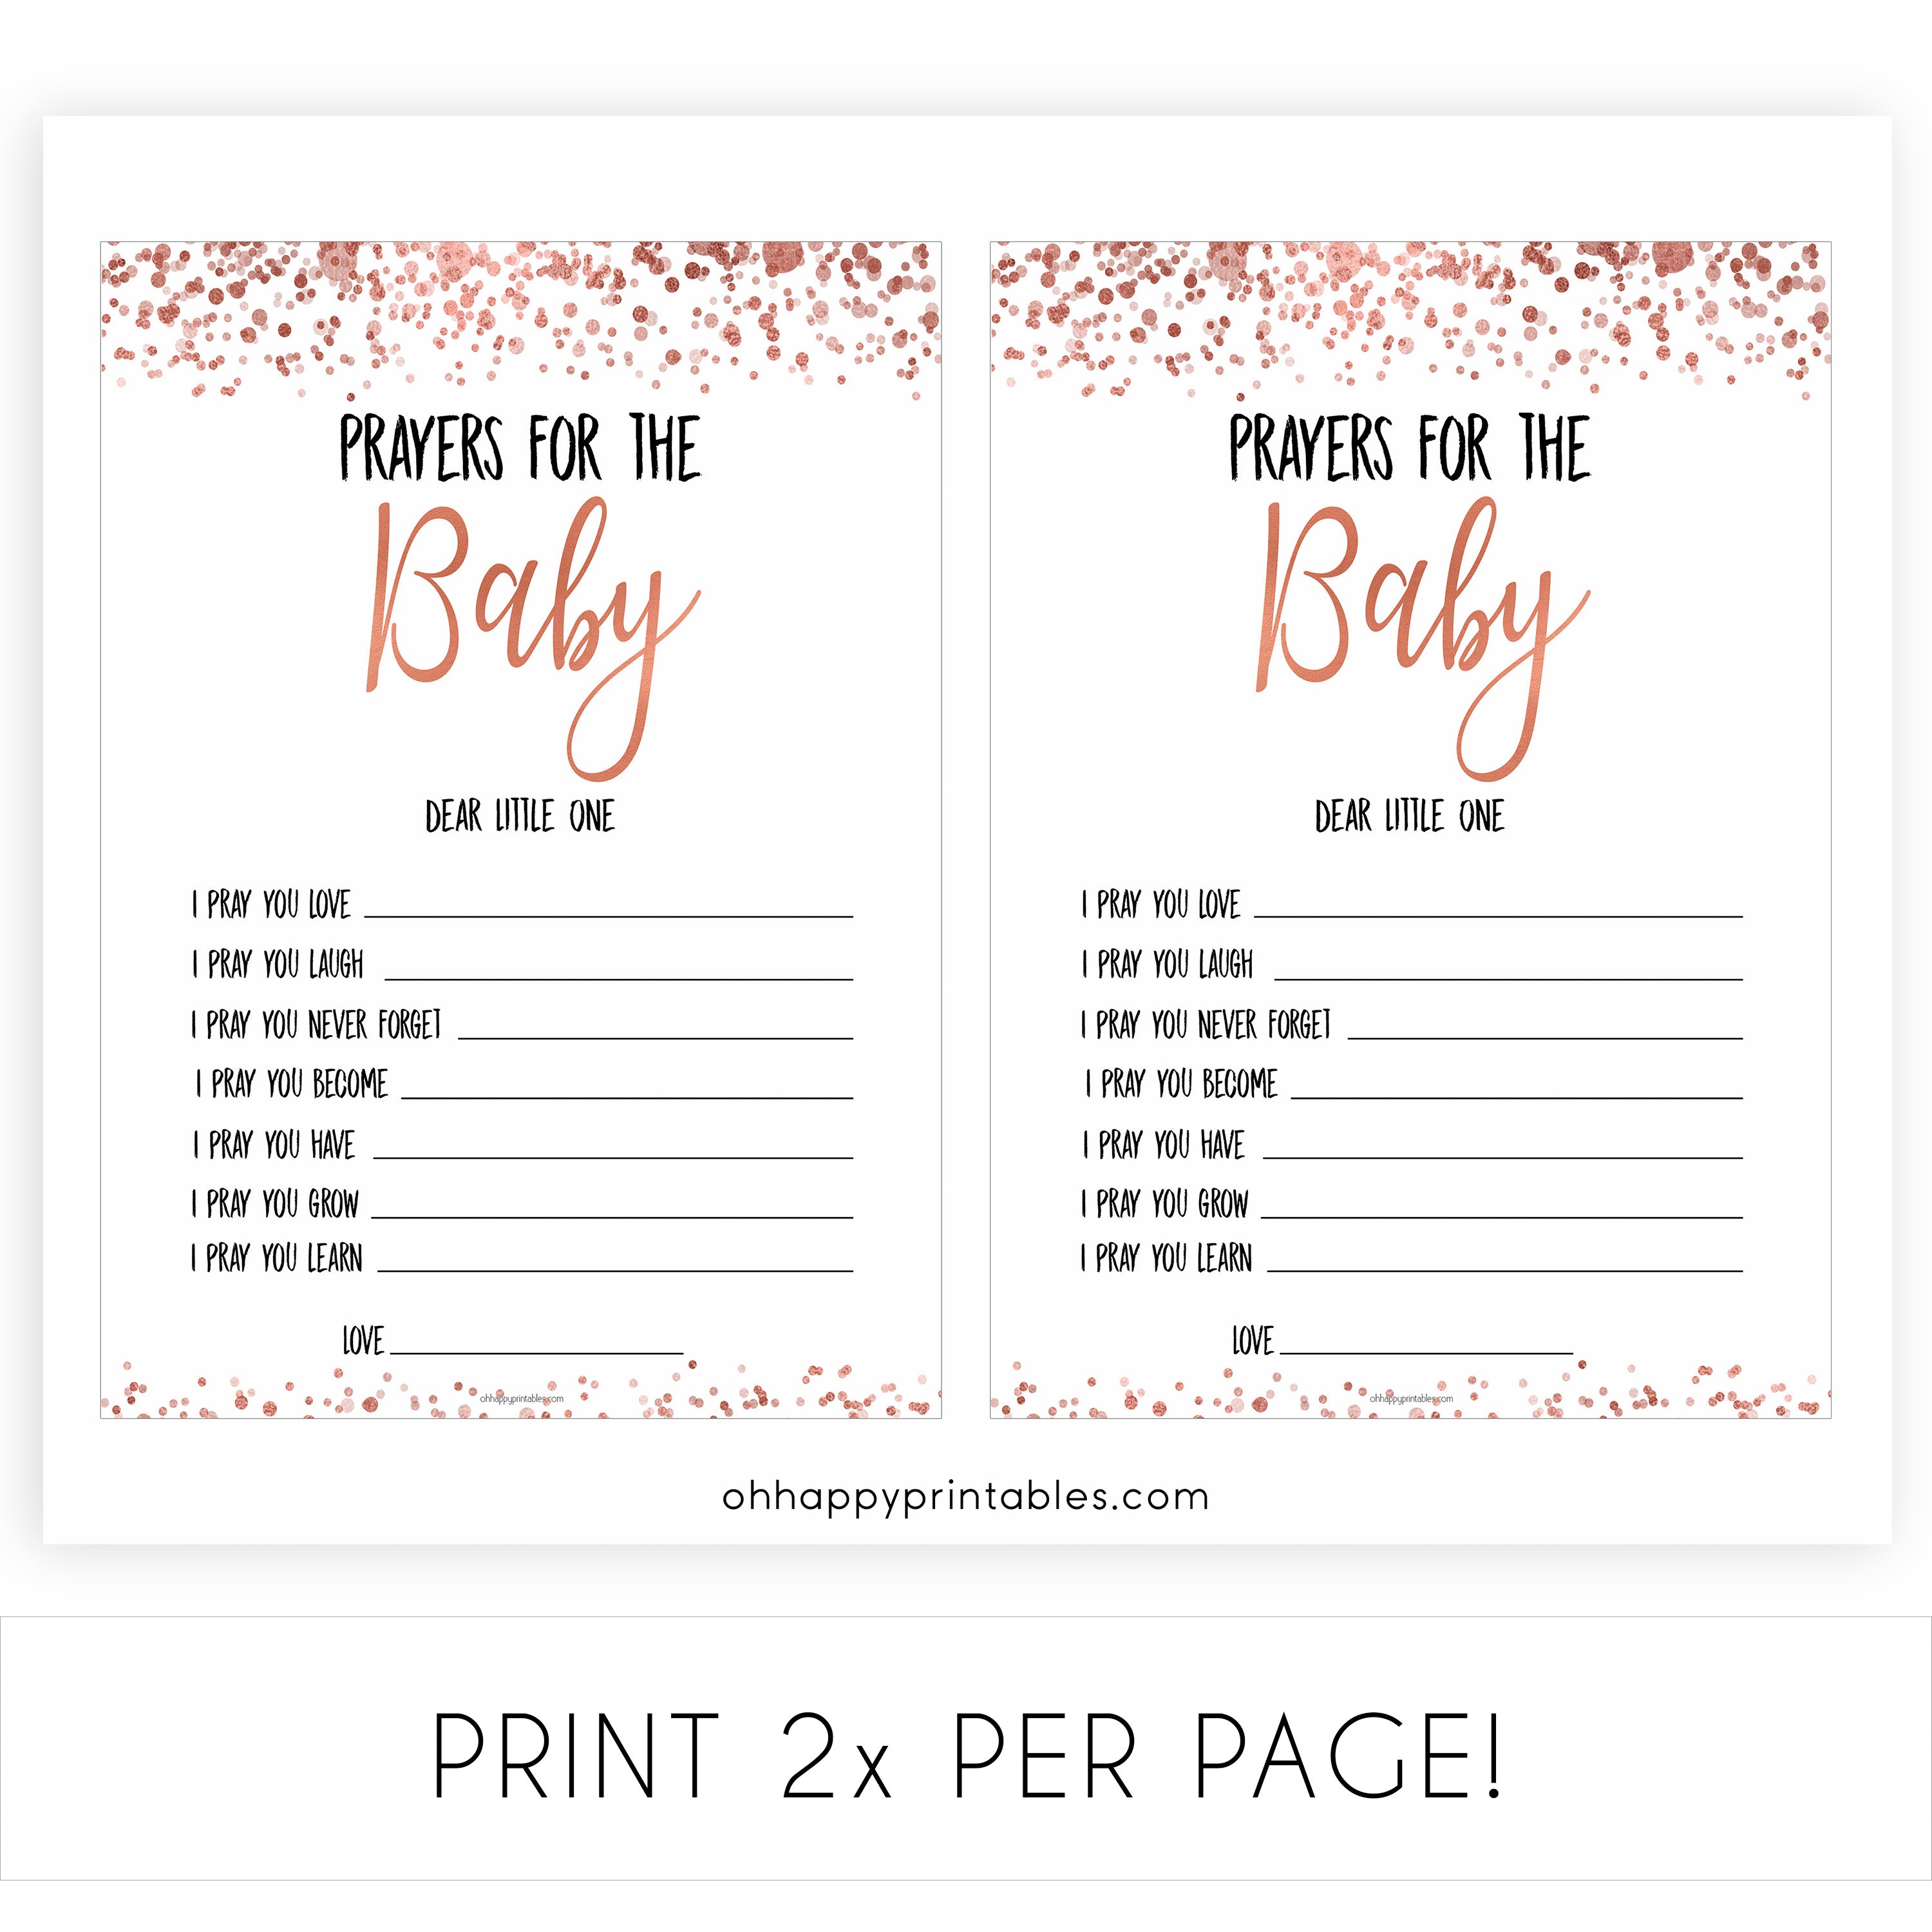 Rose Gold Prayers For The Baby, Baby Prayers, Prayers for The Baby, Rose Gold Baby Shower, Baby Shower Baby Prayers, Baby Prayers Cards, printable baby shower games, fun baby shower games, popular baby shower games